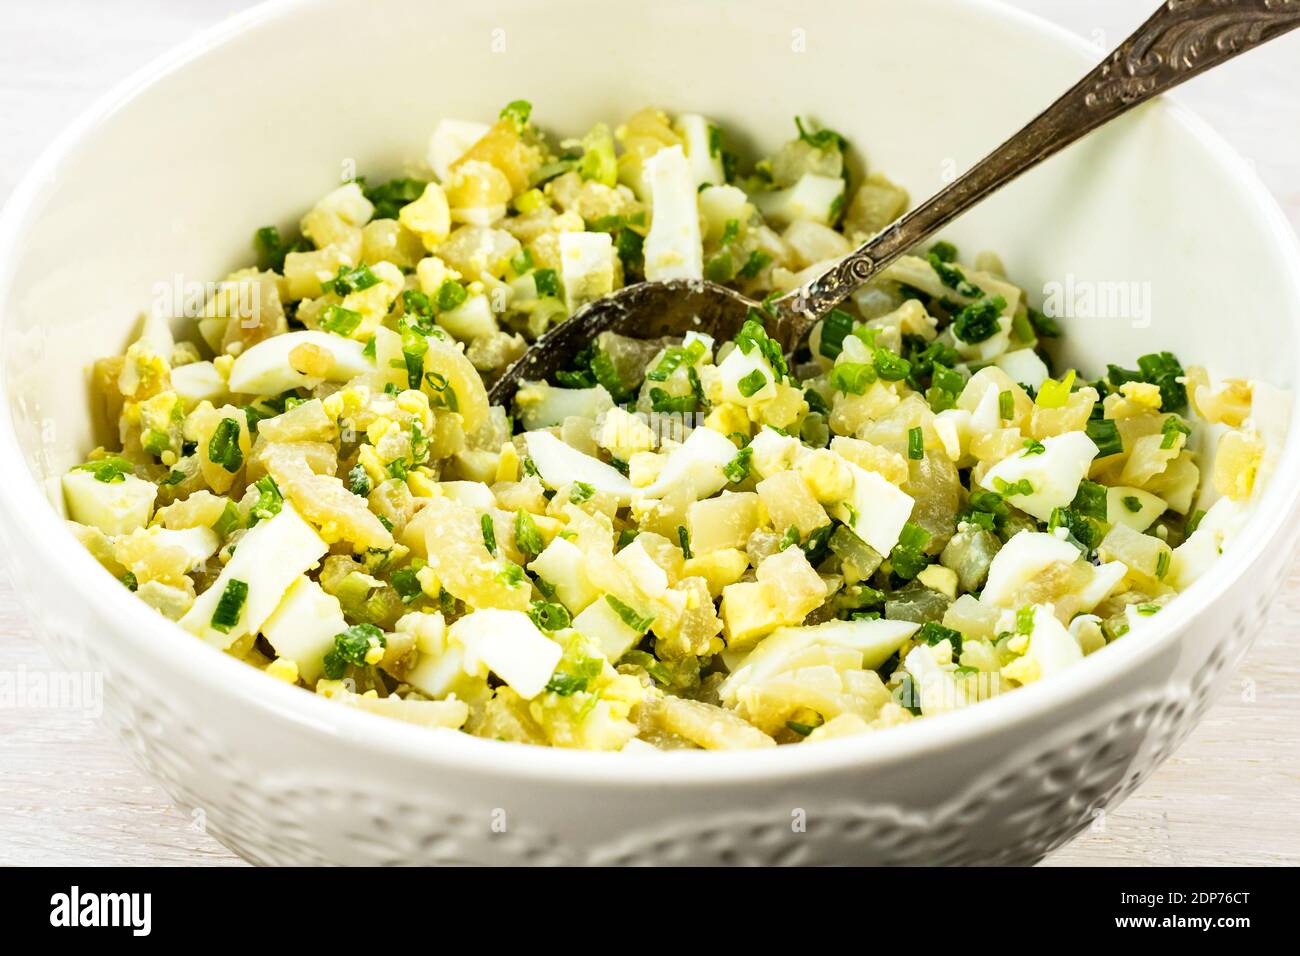 Squid salad, egg, green onion in white bowl with spoon Stock Photo